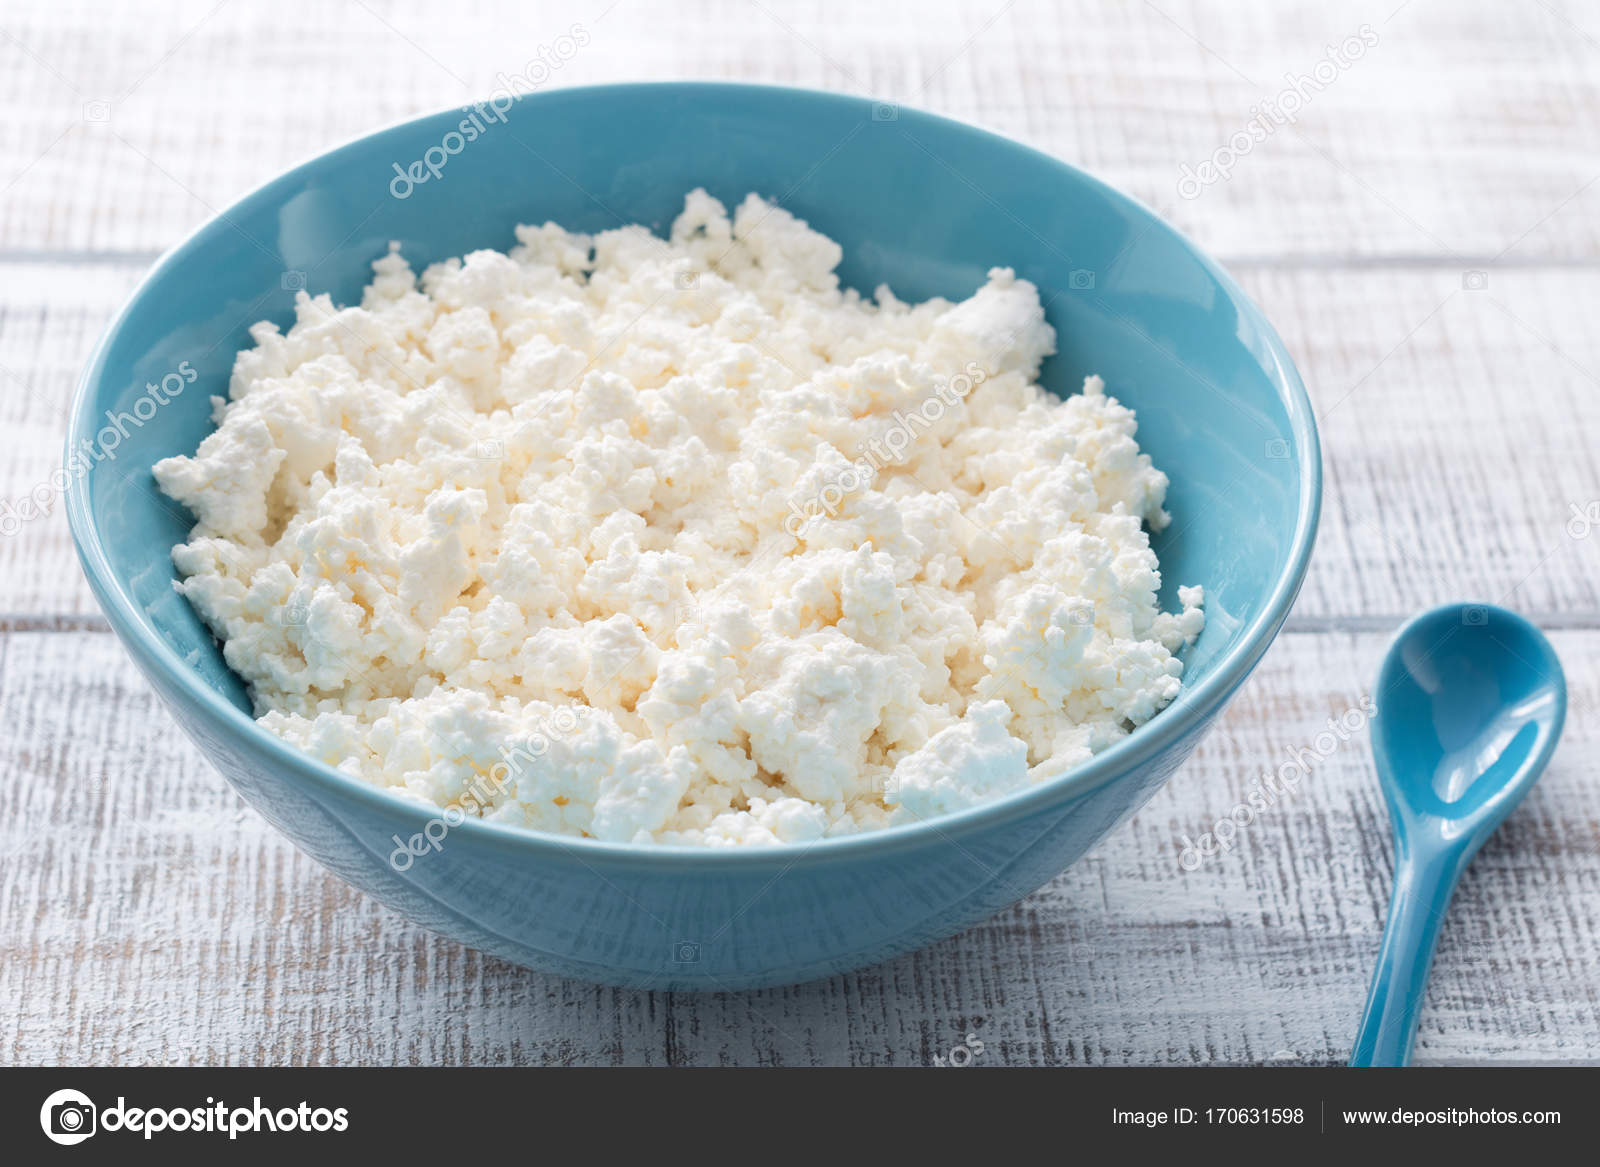 Organic Farming Cottage Cheese Or Curd Cheese In A Blue Bowl